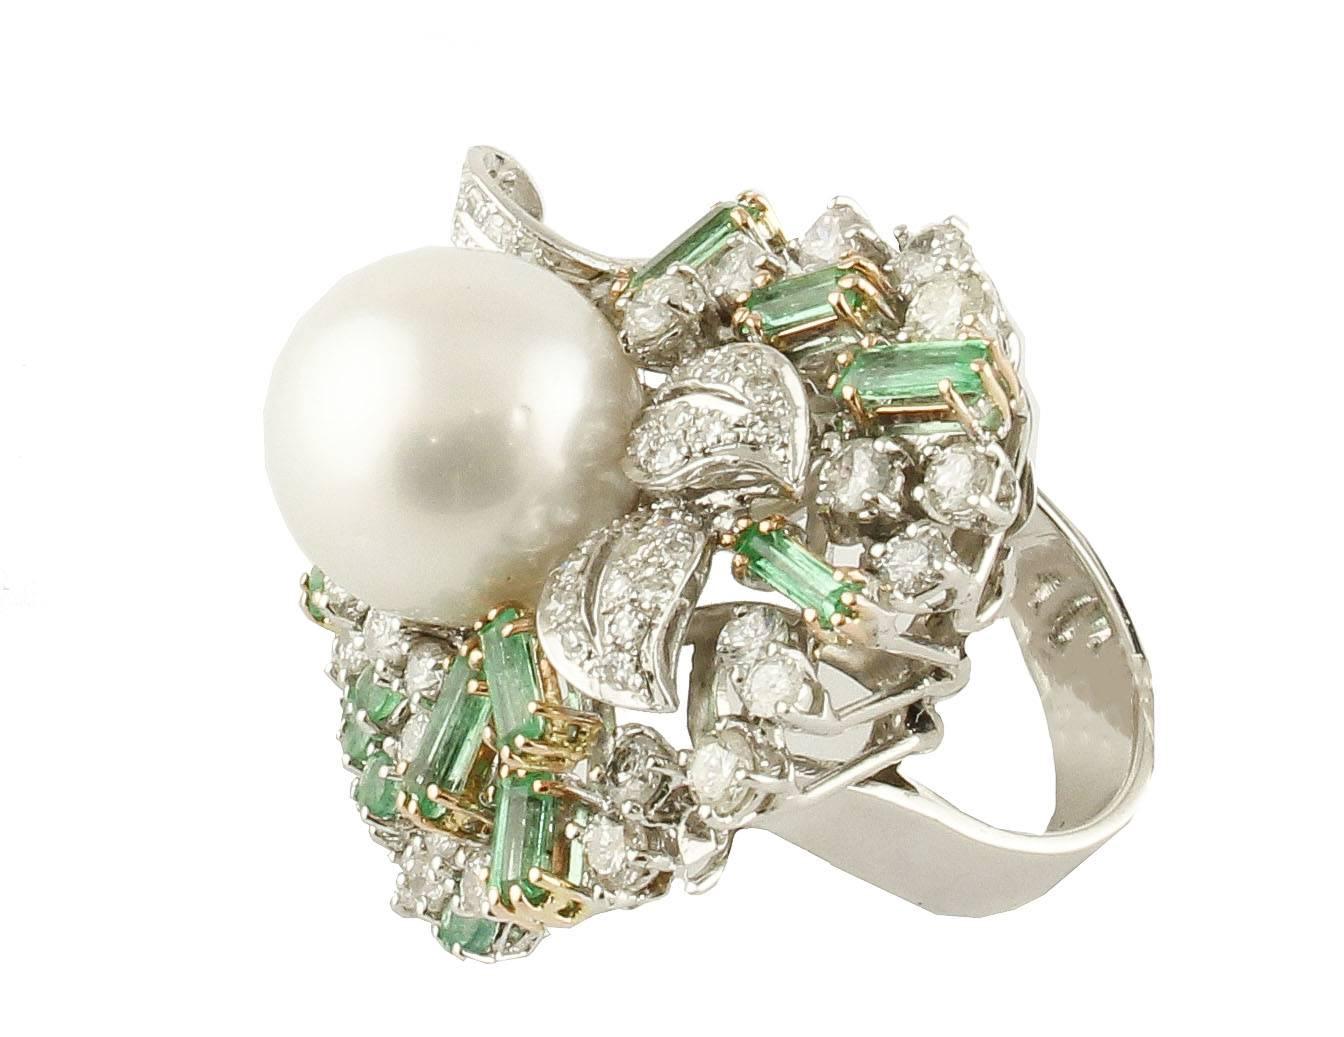 Beautiful ring in 14 kt white gold, all enriched with 3.03 ct emeralds, 4.16 ct diamonds, and fabulous Australian pearl of 4.60g / 15 mm. Total weight g 29.20
Diamonds ct 4.16
Emeralds ct 3.00
Pearl g 4.60 / mm15
Total weight g 27.10 g
Italian Size